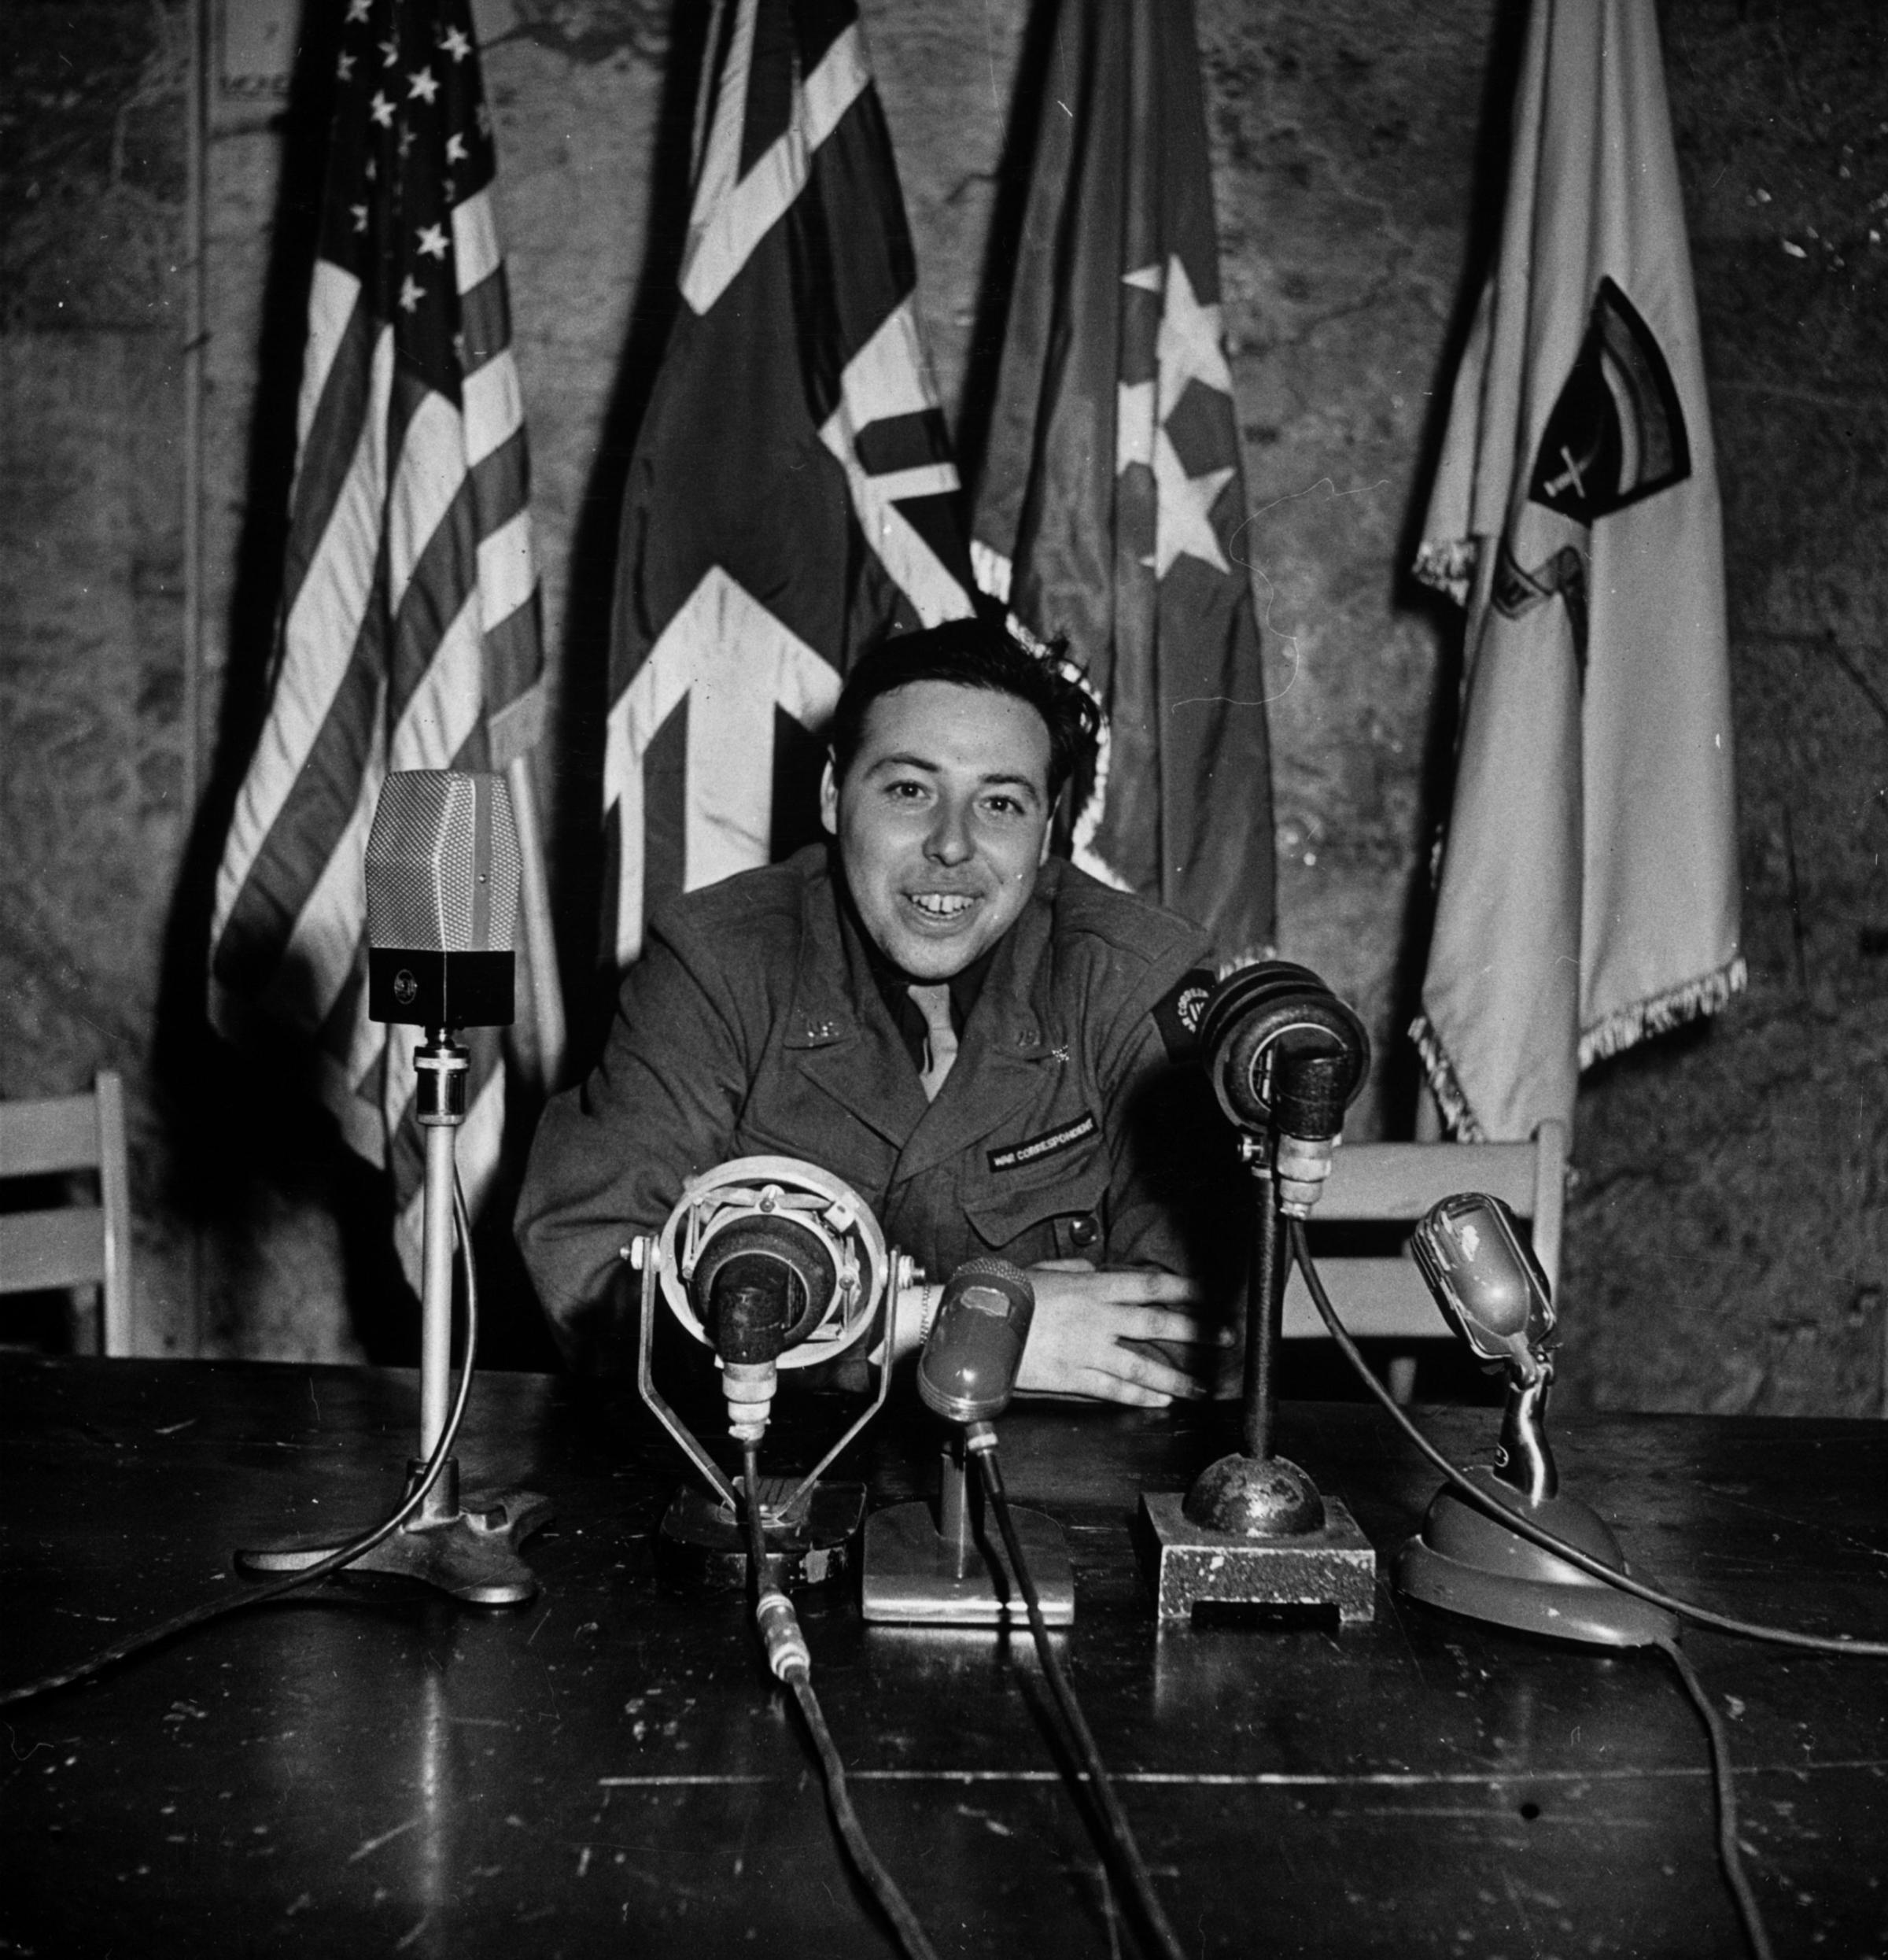 LIFE photographer/war correspondent Ralph Morse's self-portrait in the same chair from which General Eisenhower announced Allied victory in Europe.